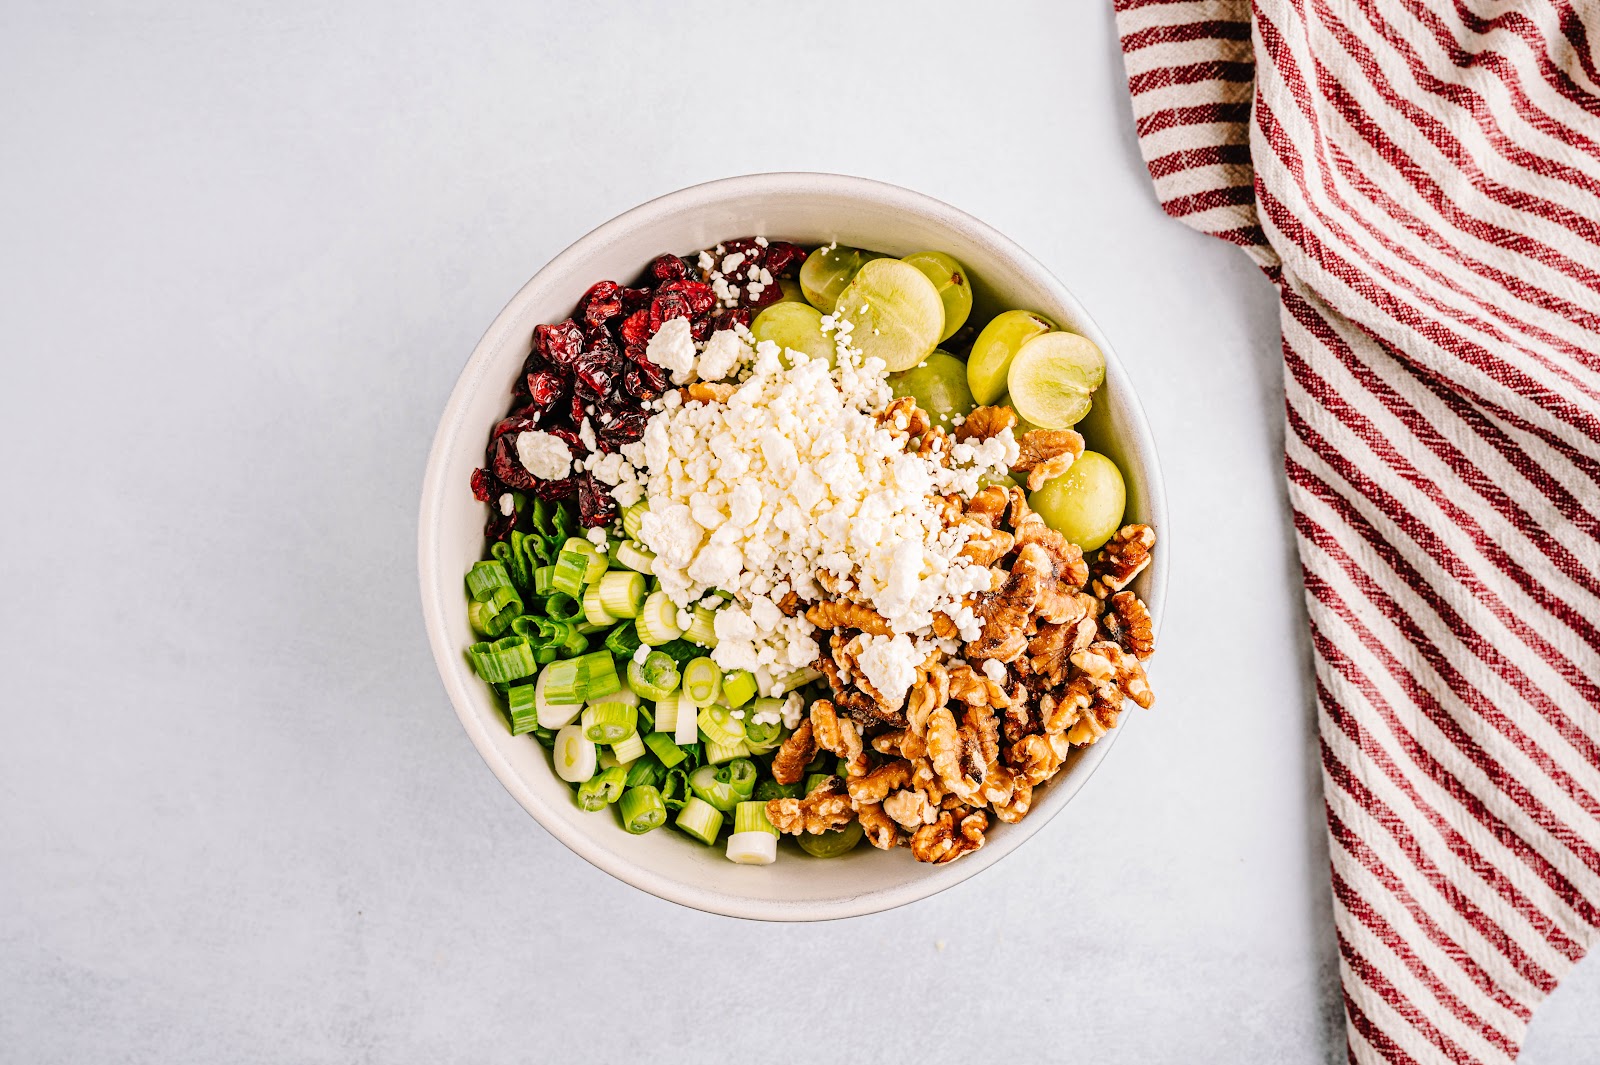 Add rice, grapes, scallions, cranberries, walnuts, and goat cheese to a serving bowl and mix. 